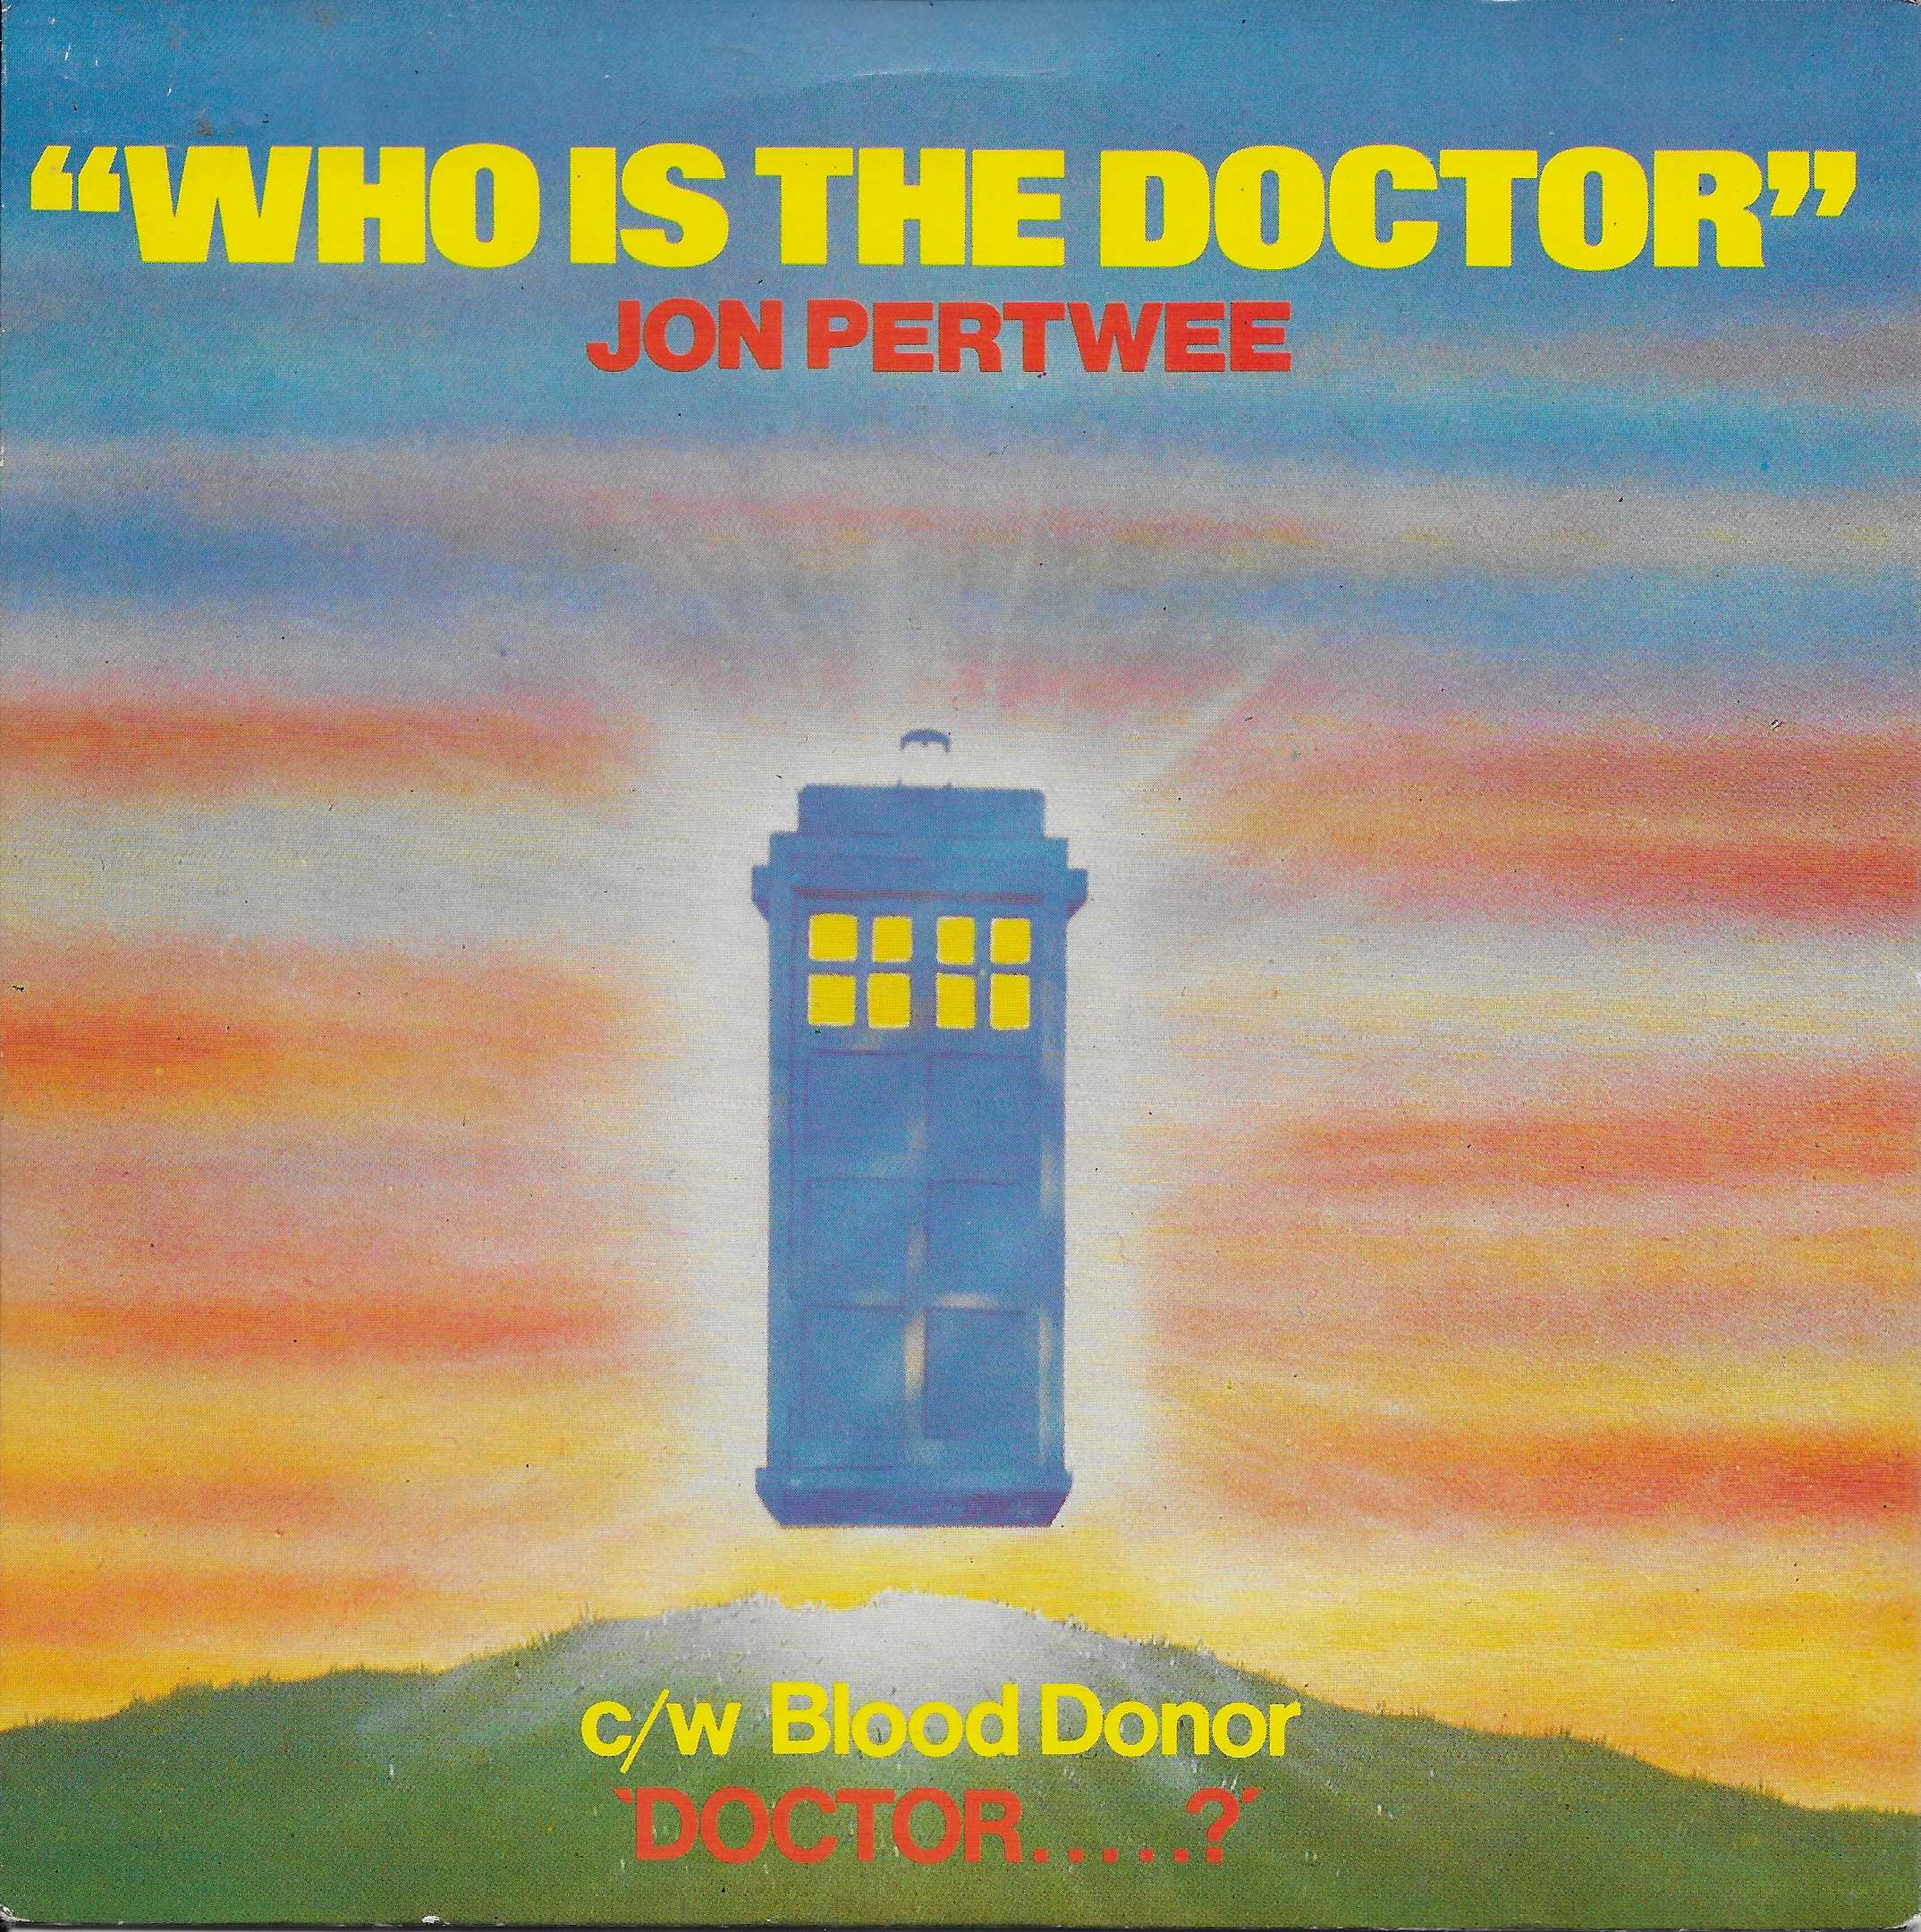 Picture of DOCTOR 1 Who is Doctor Who by artist Ron Grainer / MacIver / Hale / Coxon / Pertwee from the BBC records and Tapes library